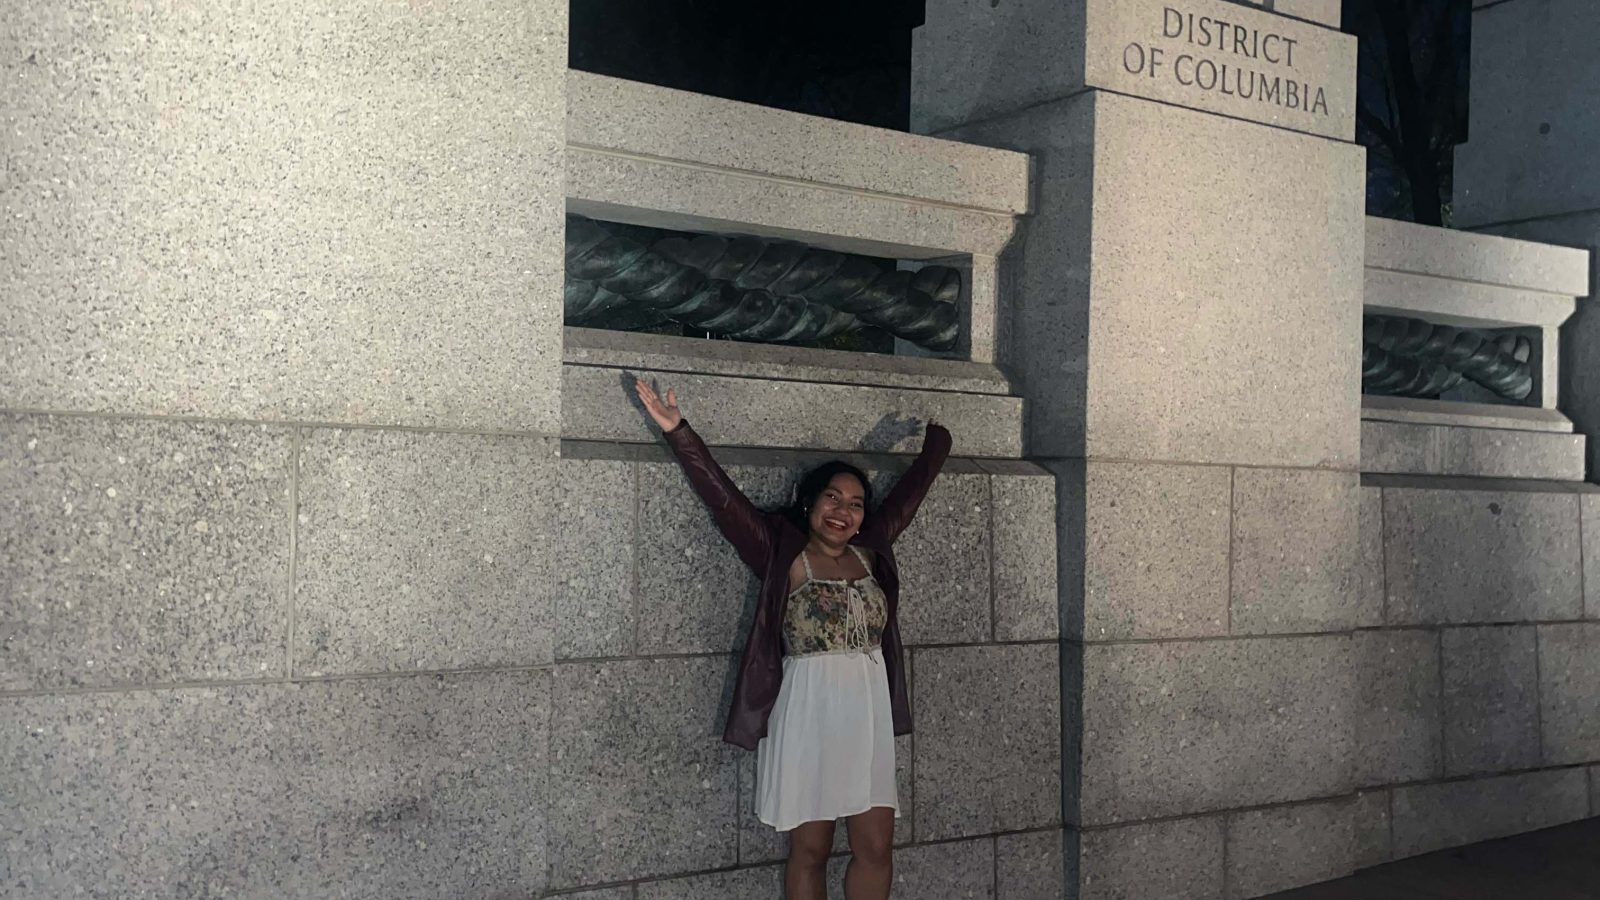 Mara stands with her arms wide between the Hawaii and DC monuments at the World War 2 Memorial